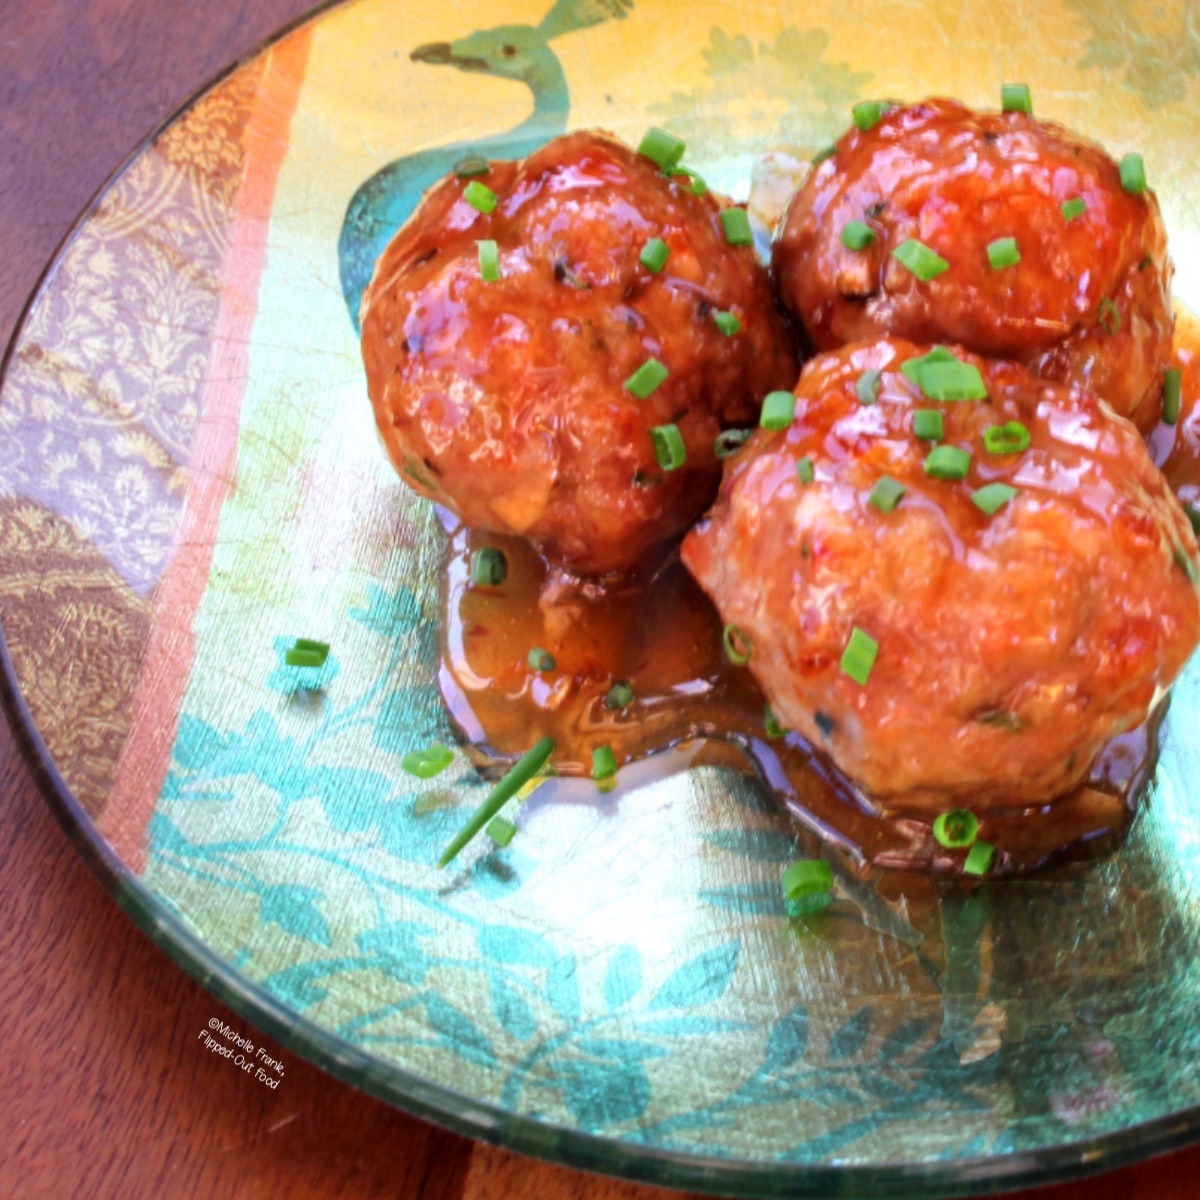 Three sweet & zingy Asian meatballs on a decorative party plate. The meatballs are garnished with minced chives.